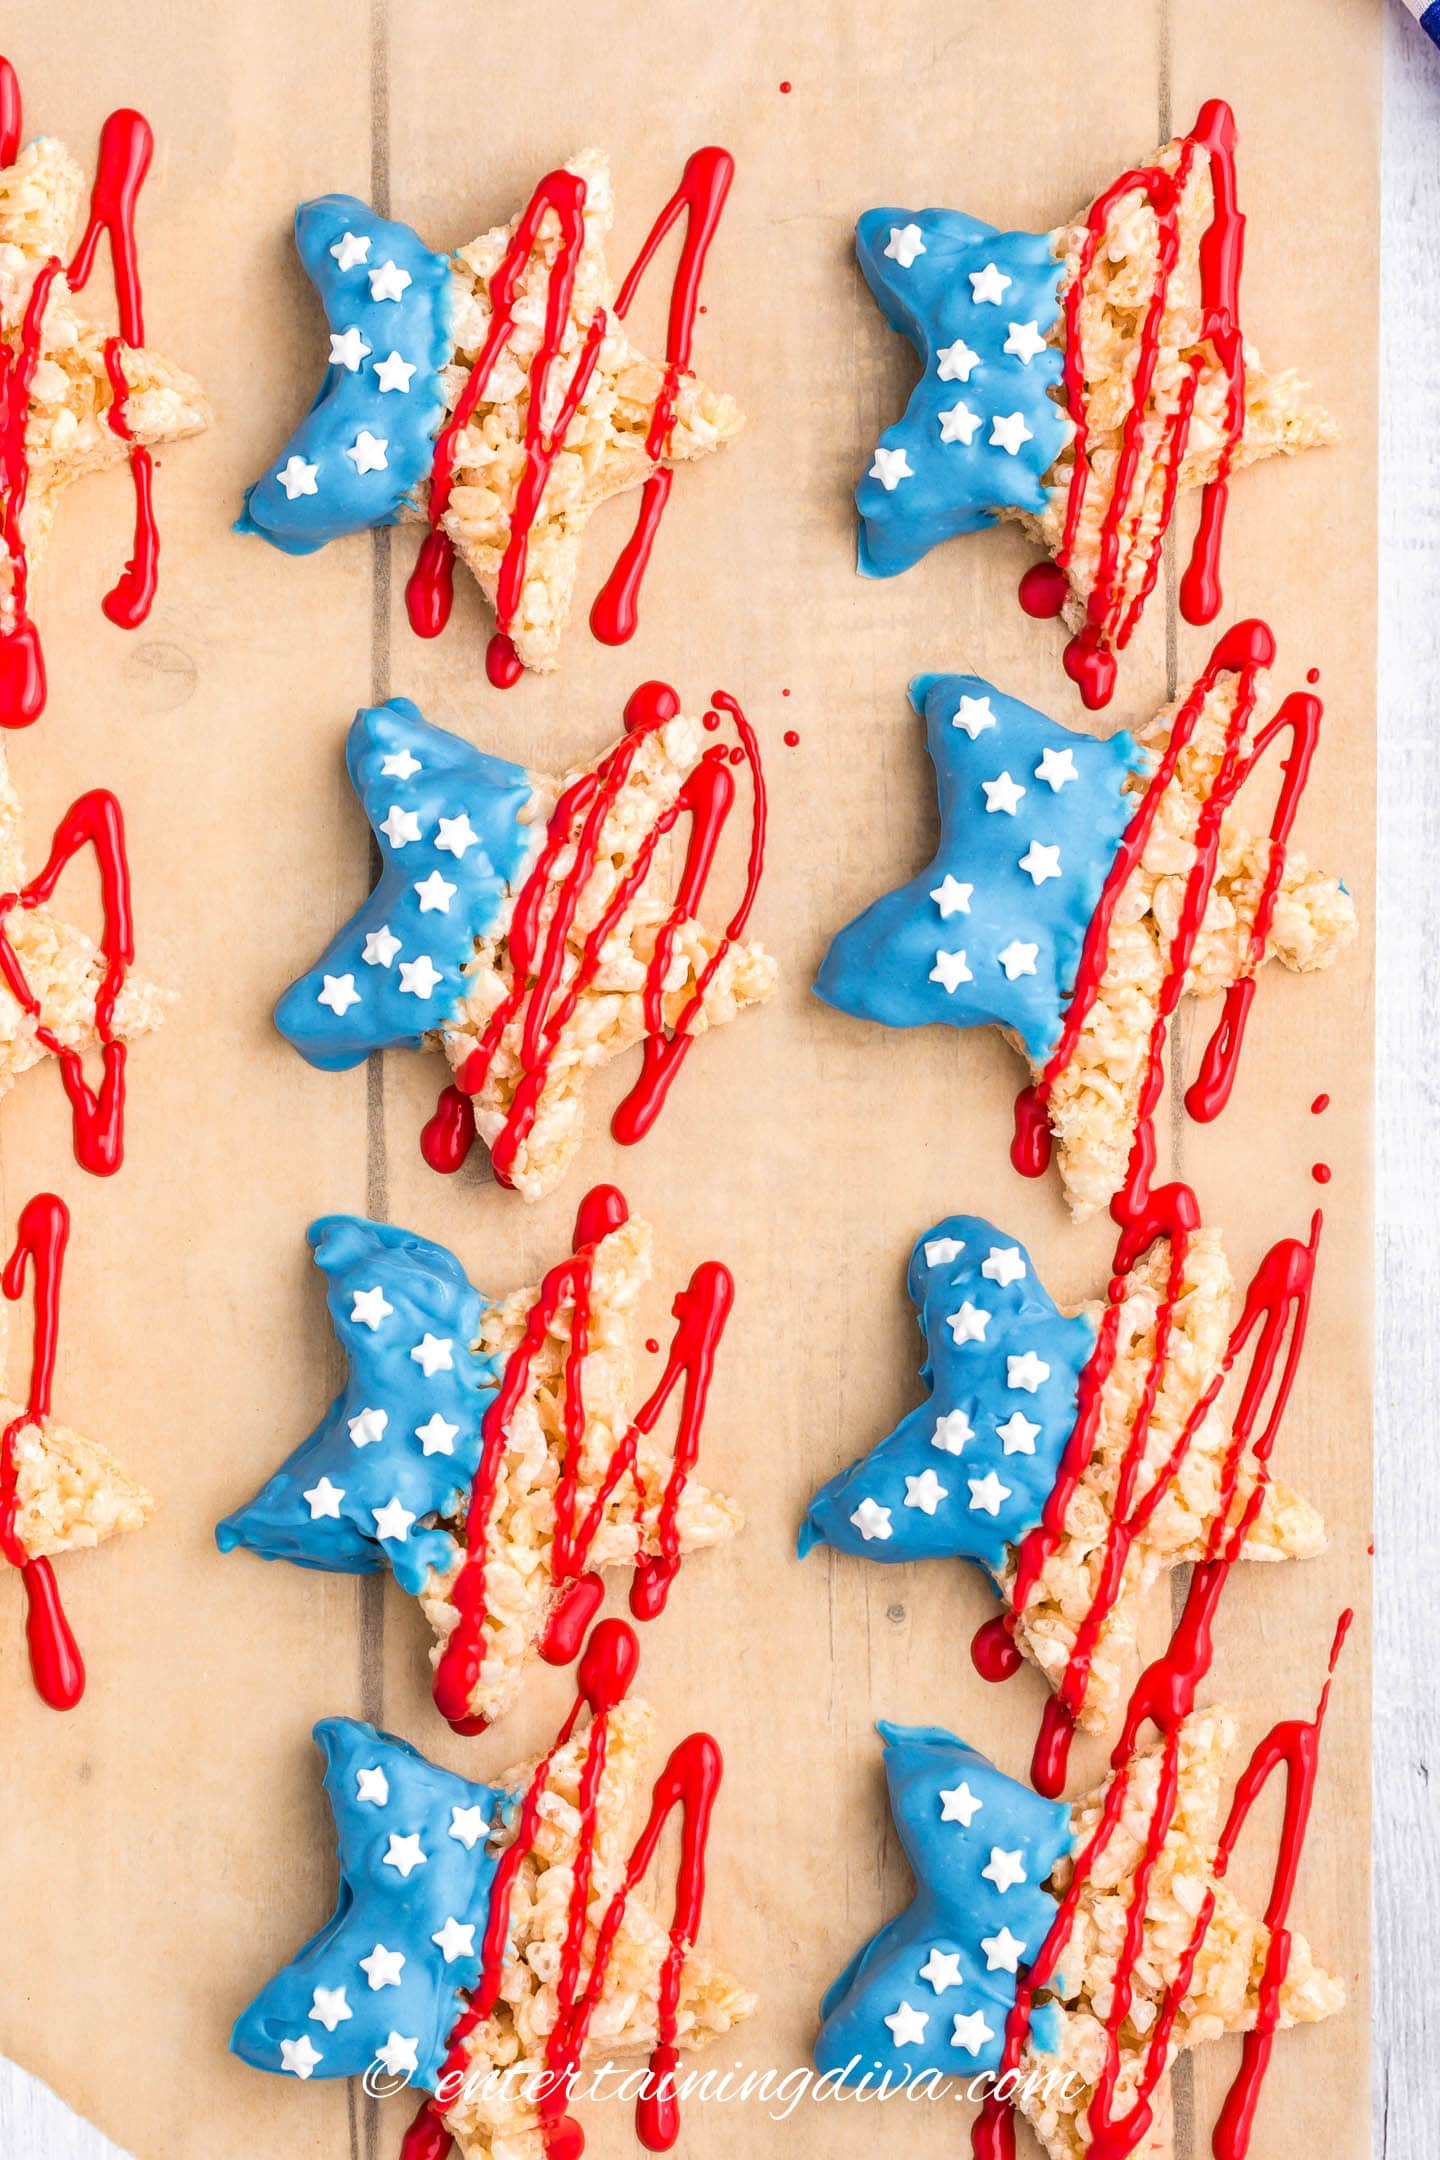 star-shaped rice krispie treats with red, white and blue decorations